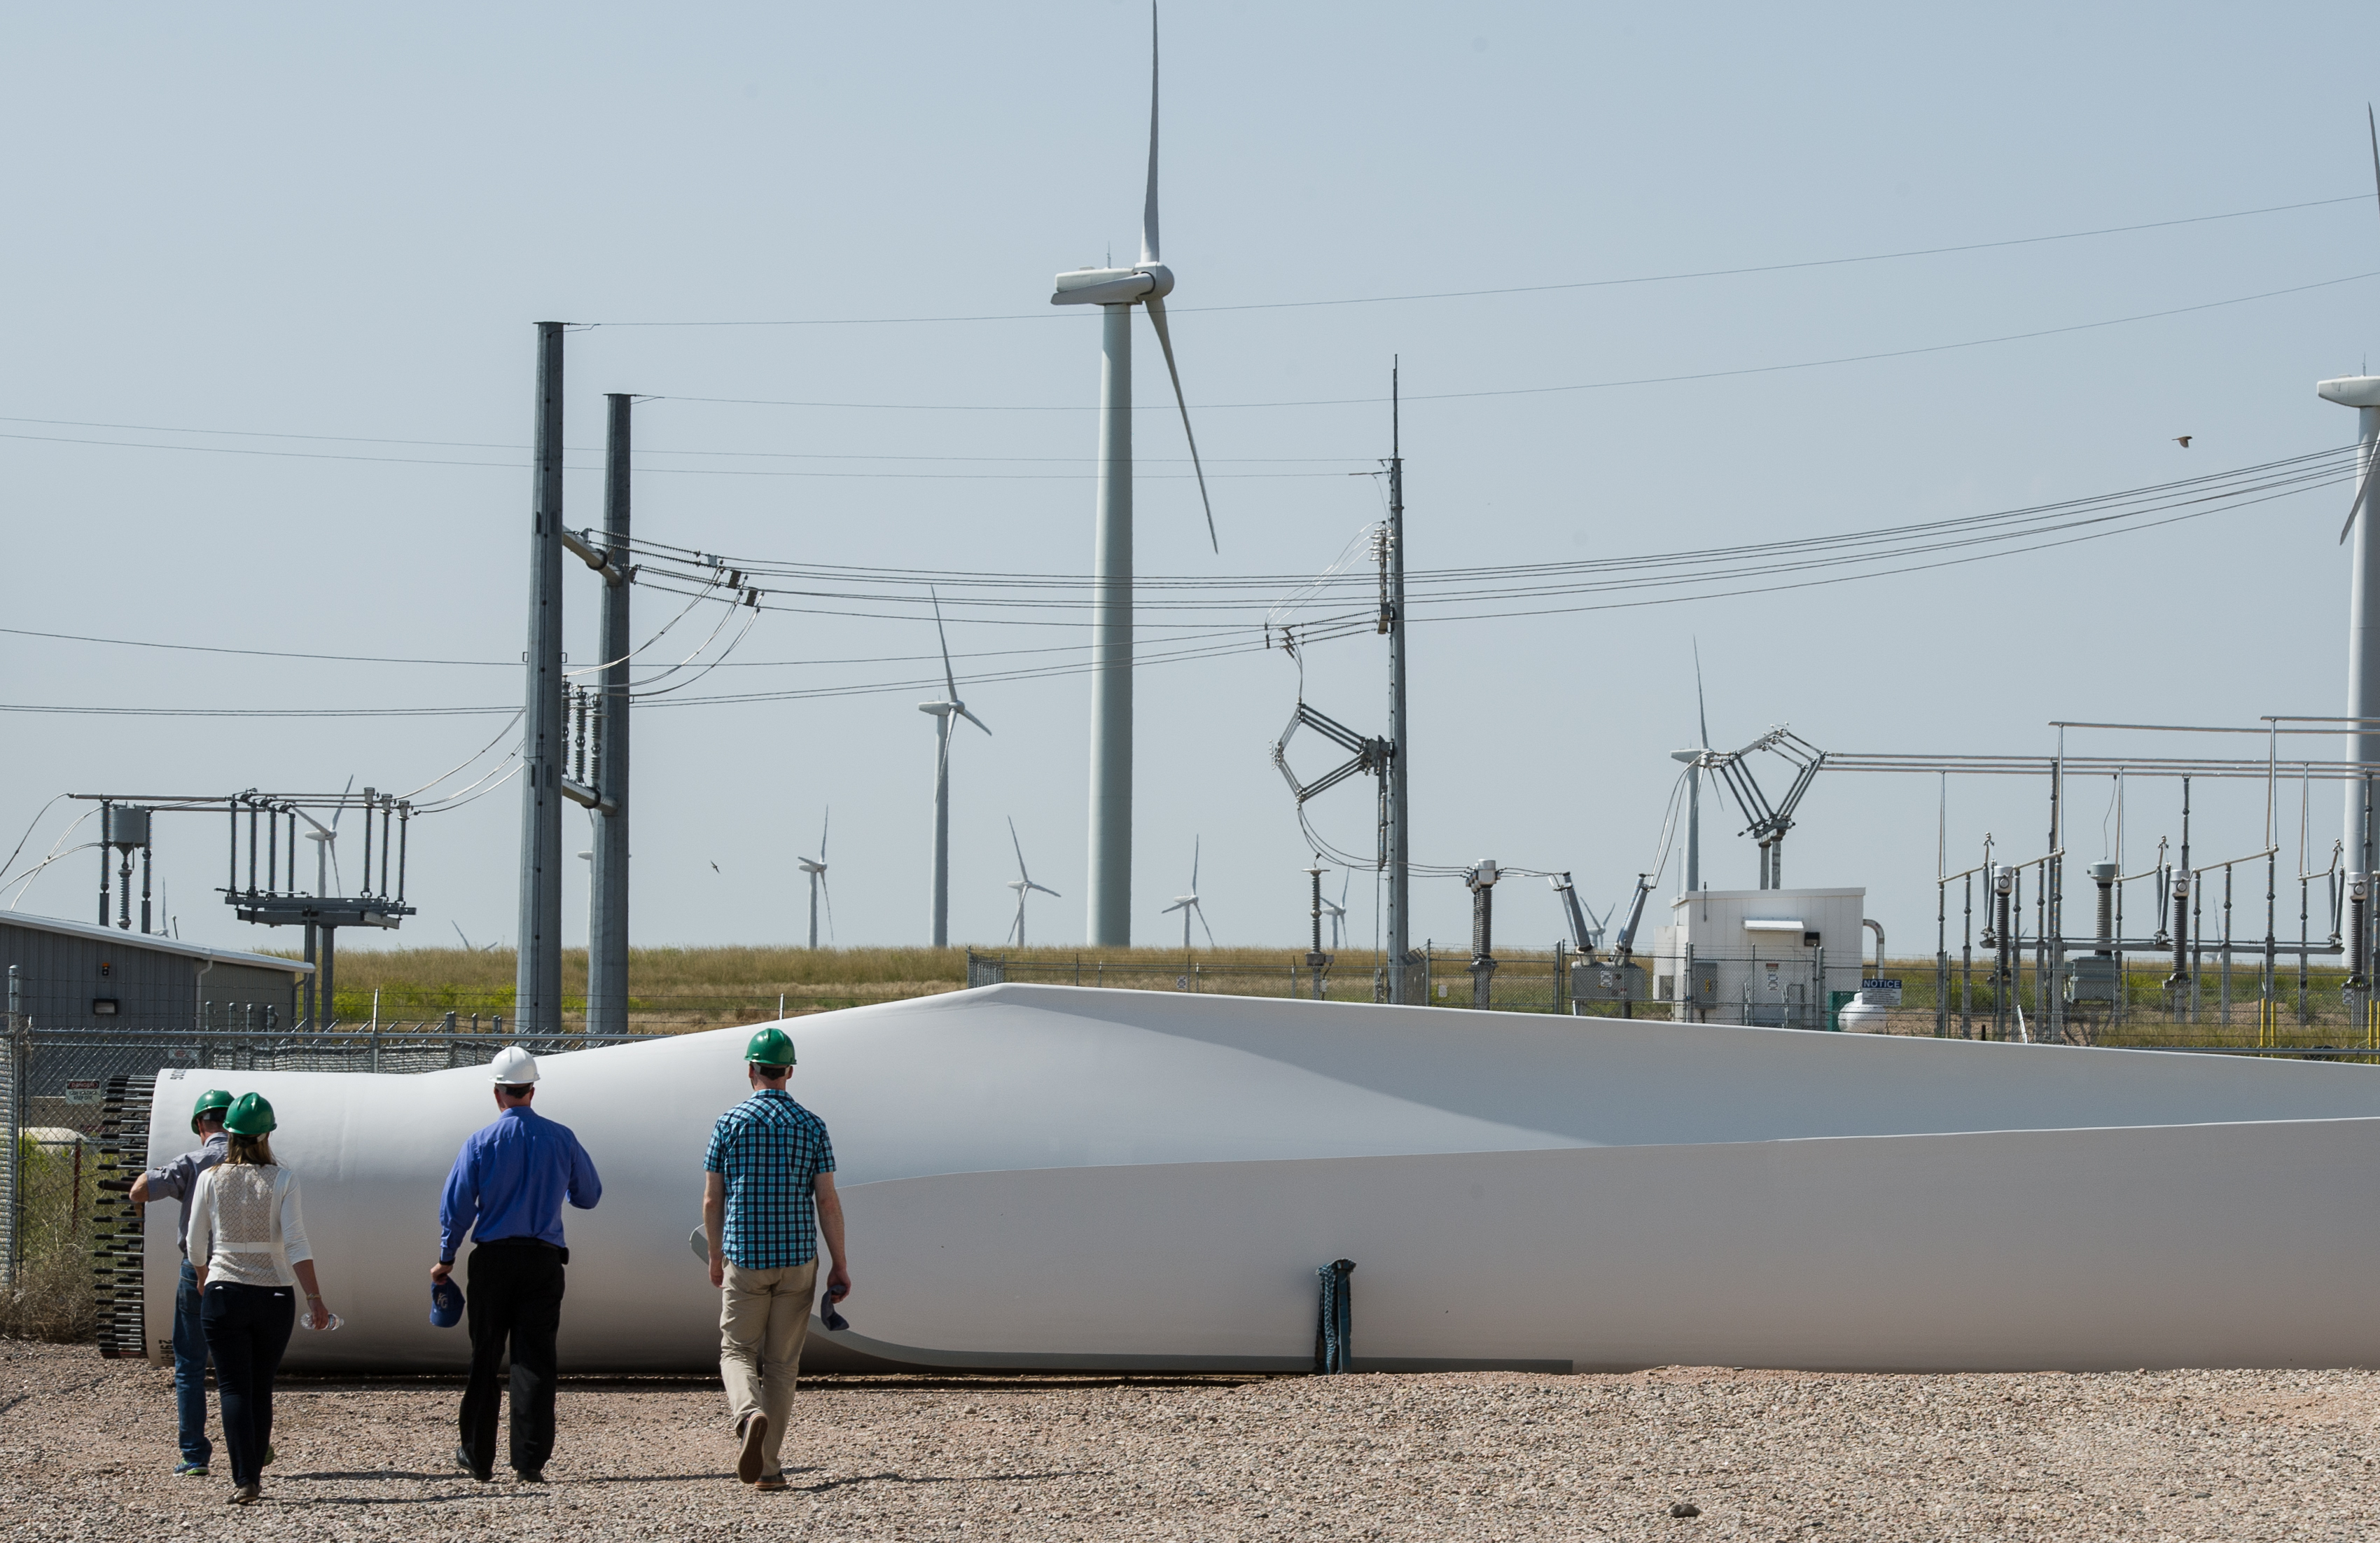 A group of people in hard hats walk toward a wind turbine blade lying on the ground. Power lines and more wind turbines are visible in the background